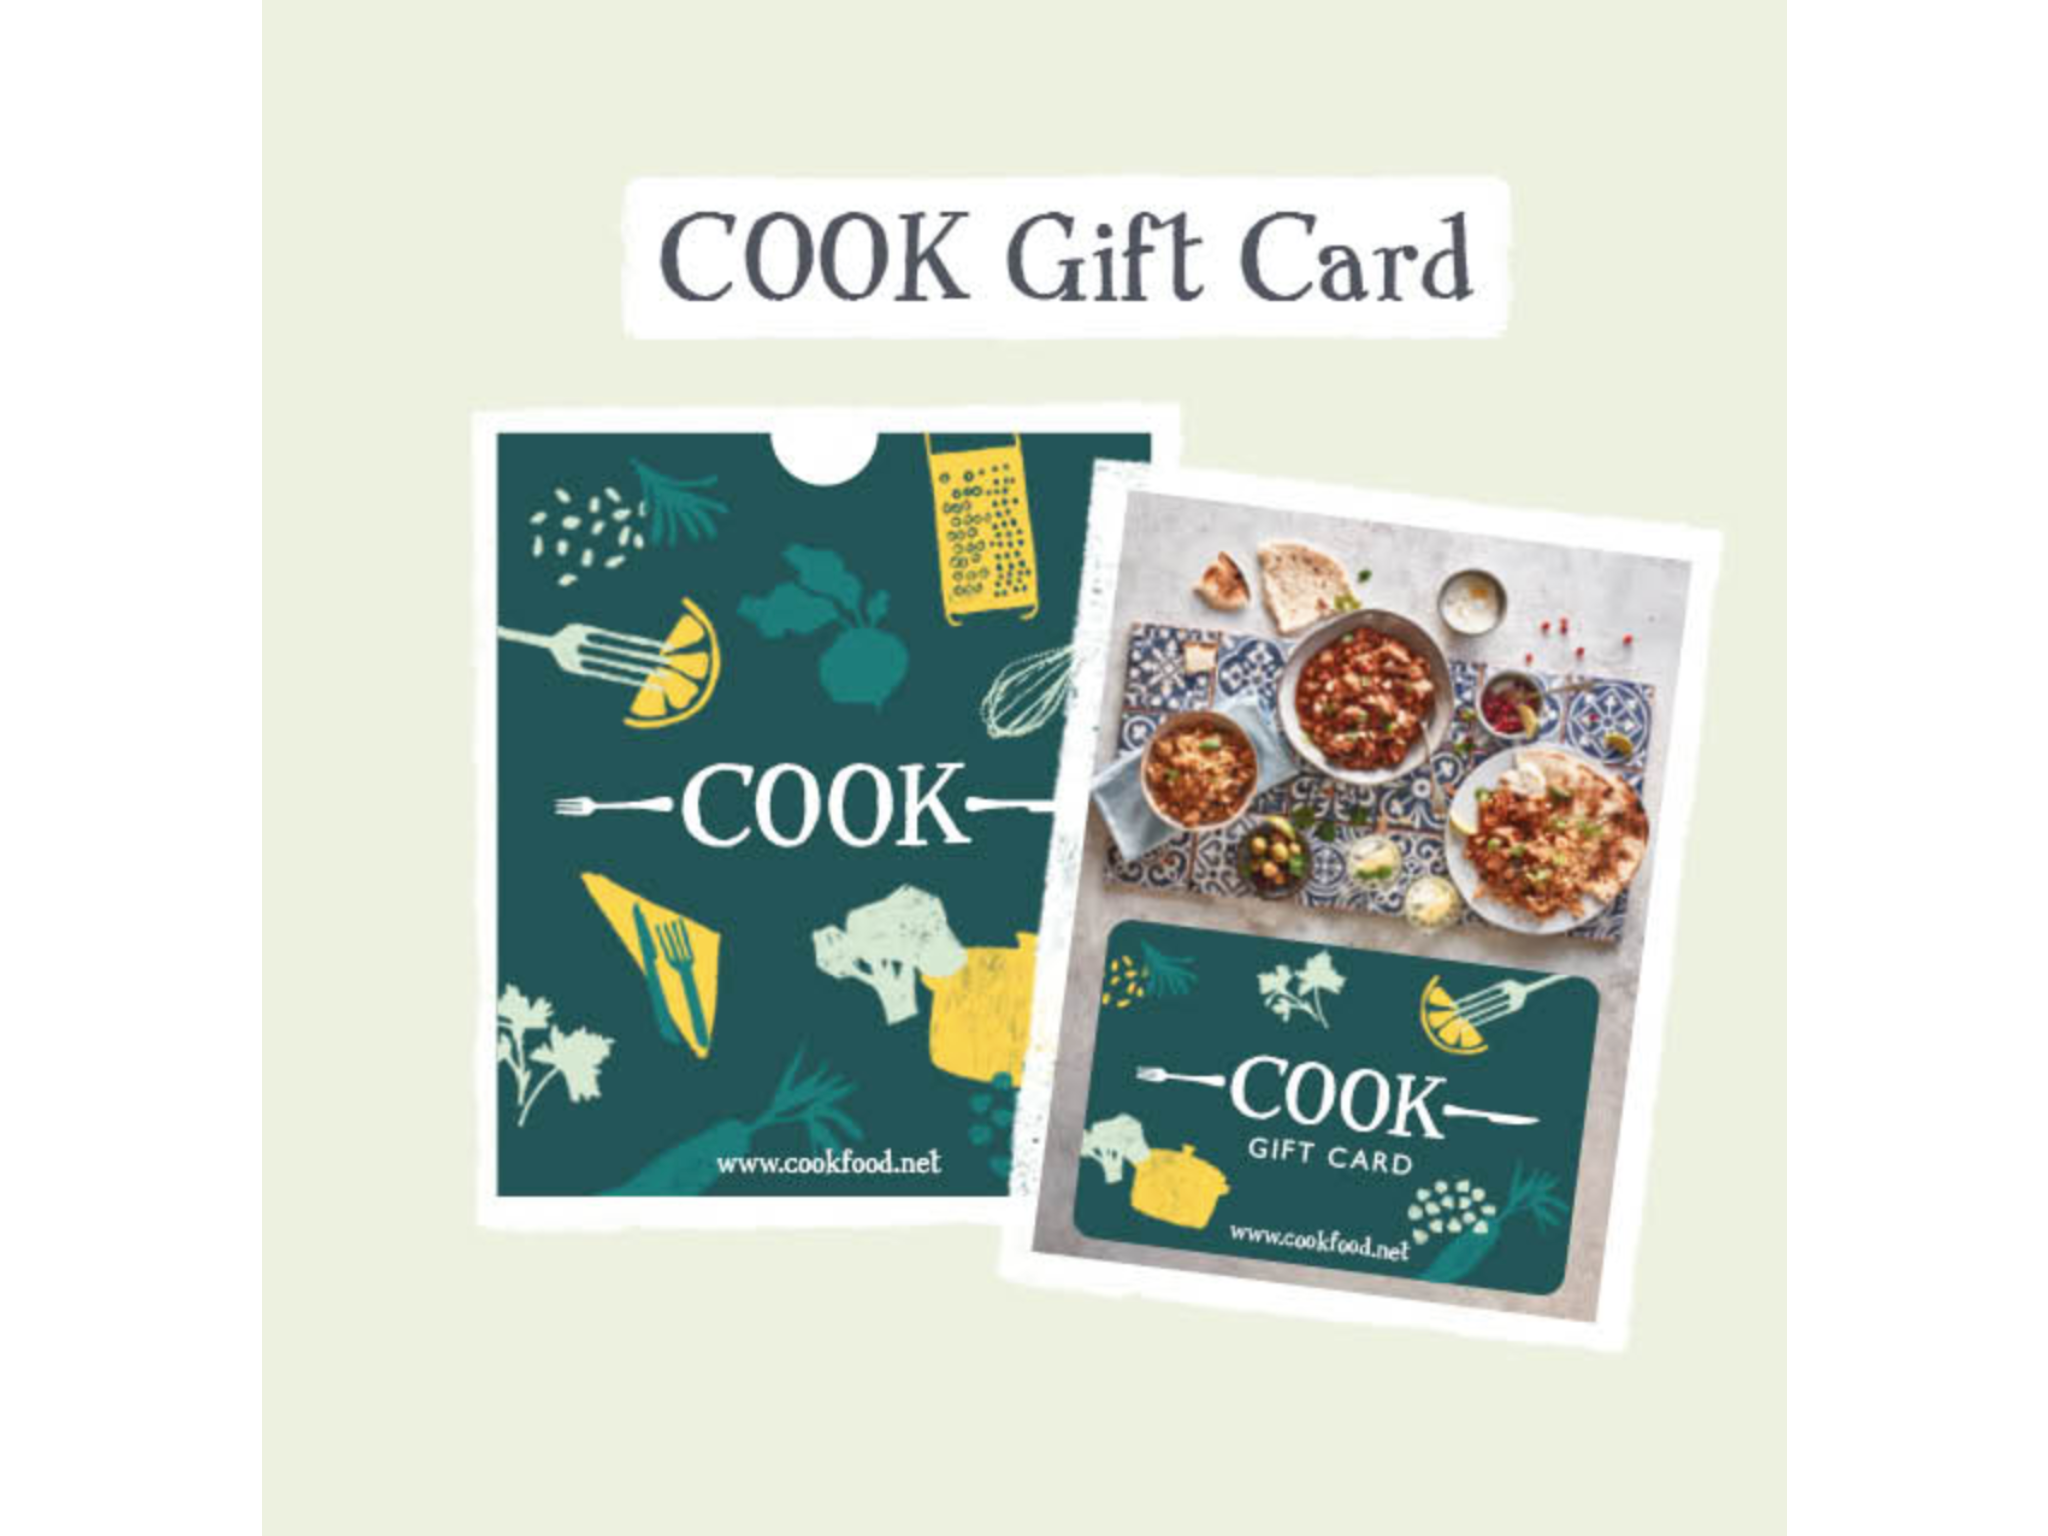 Cook-giftcard-indybest